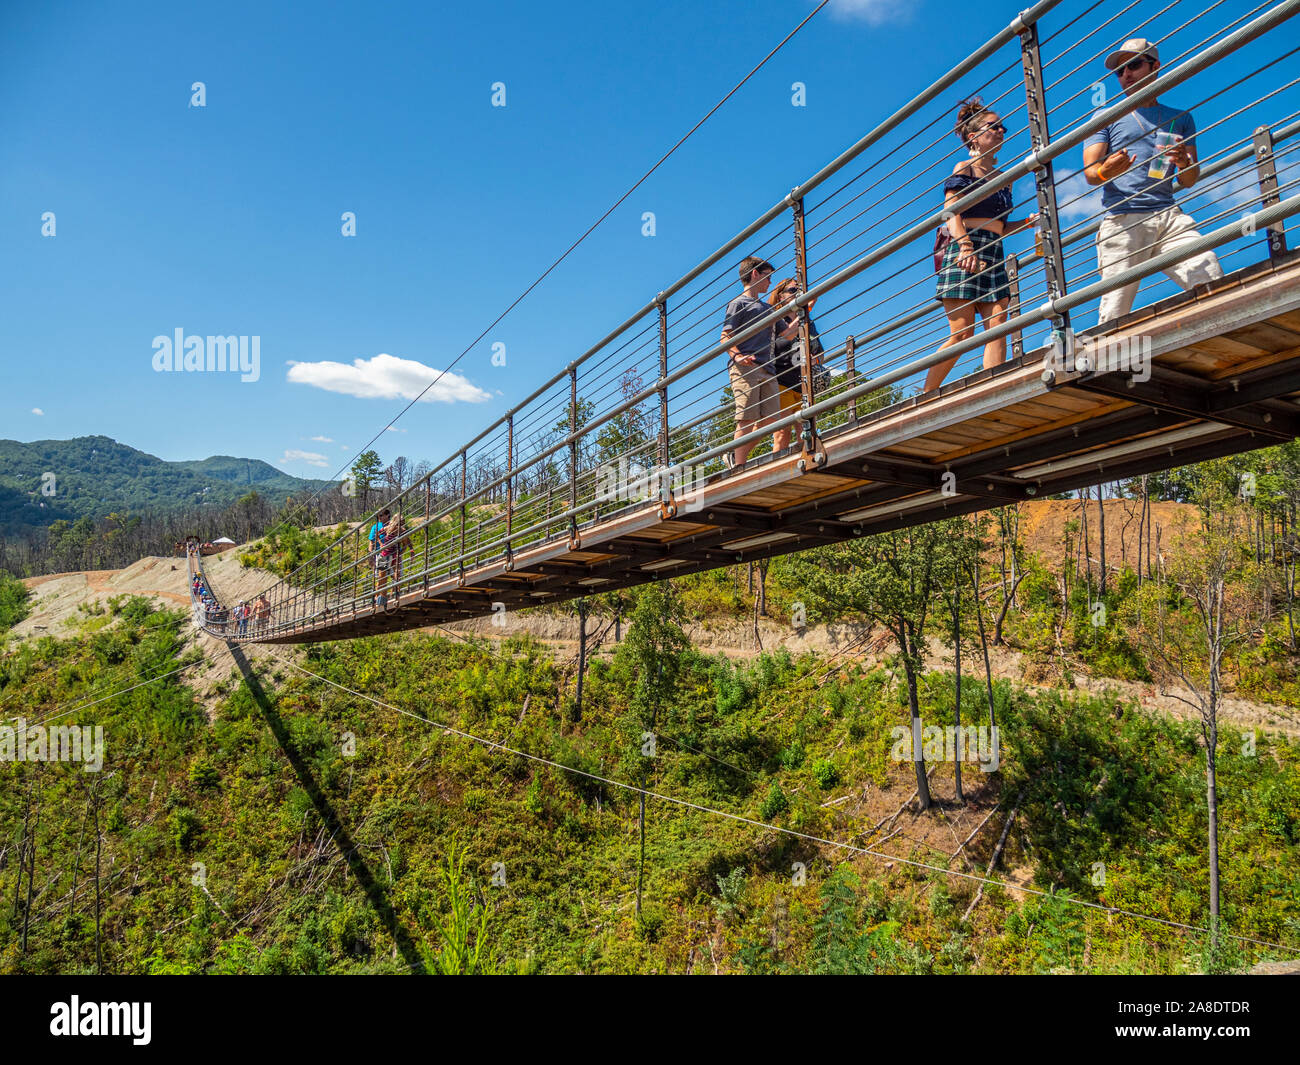 Gatlinburg pedestrian suspension Skybridge in the Great Smoky Mountains resort town of Gatlinburg Tennessee in the United States Stock Photo